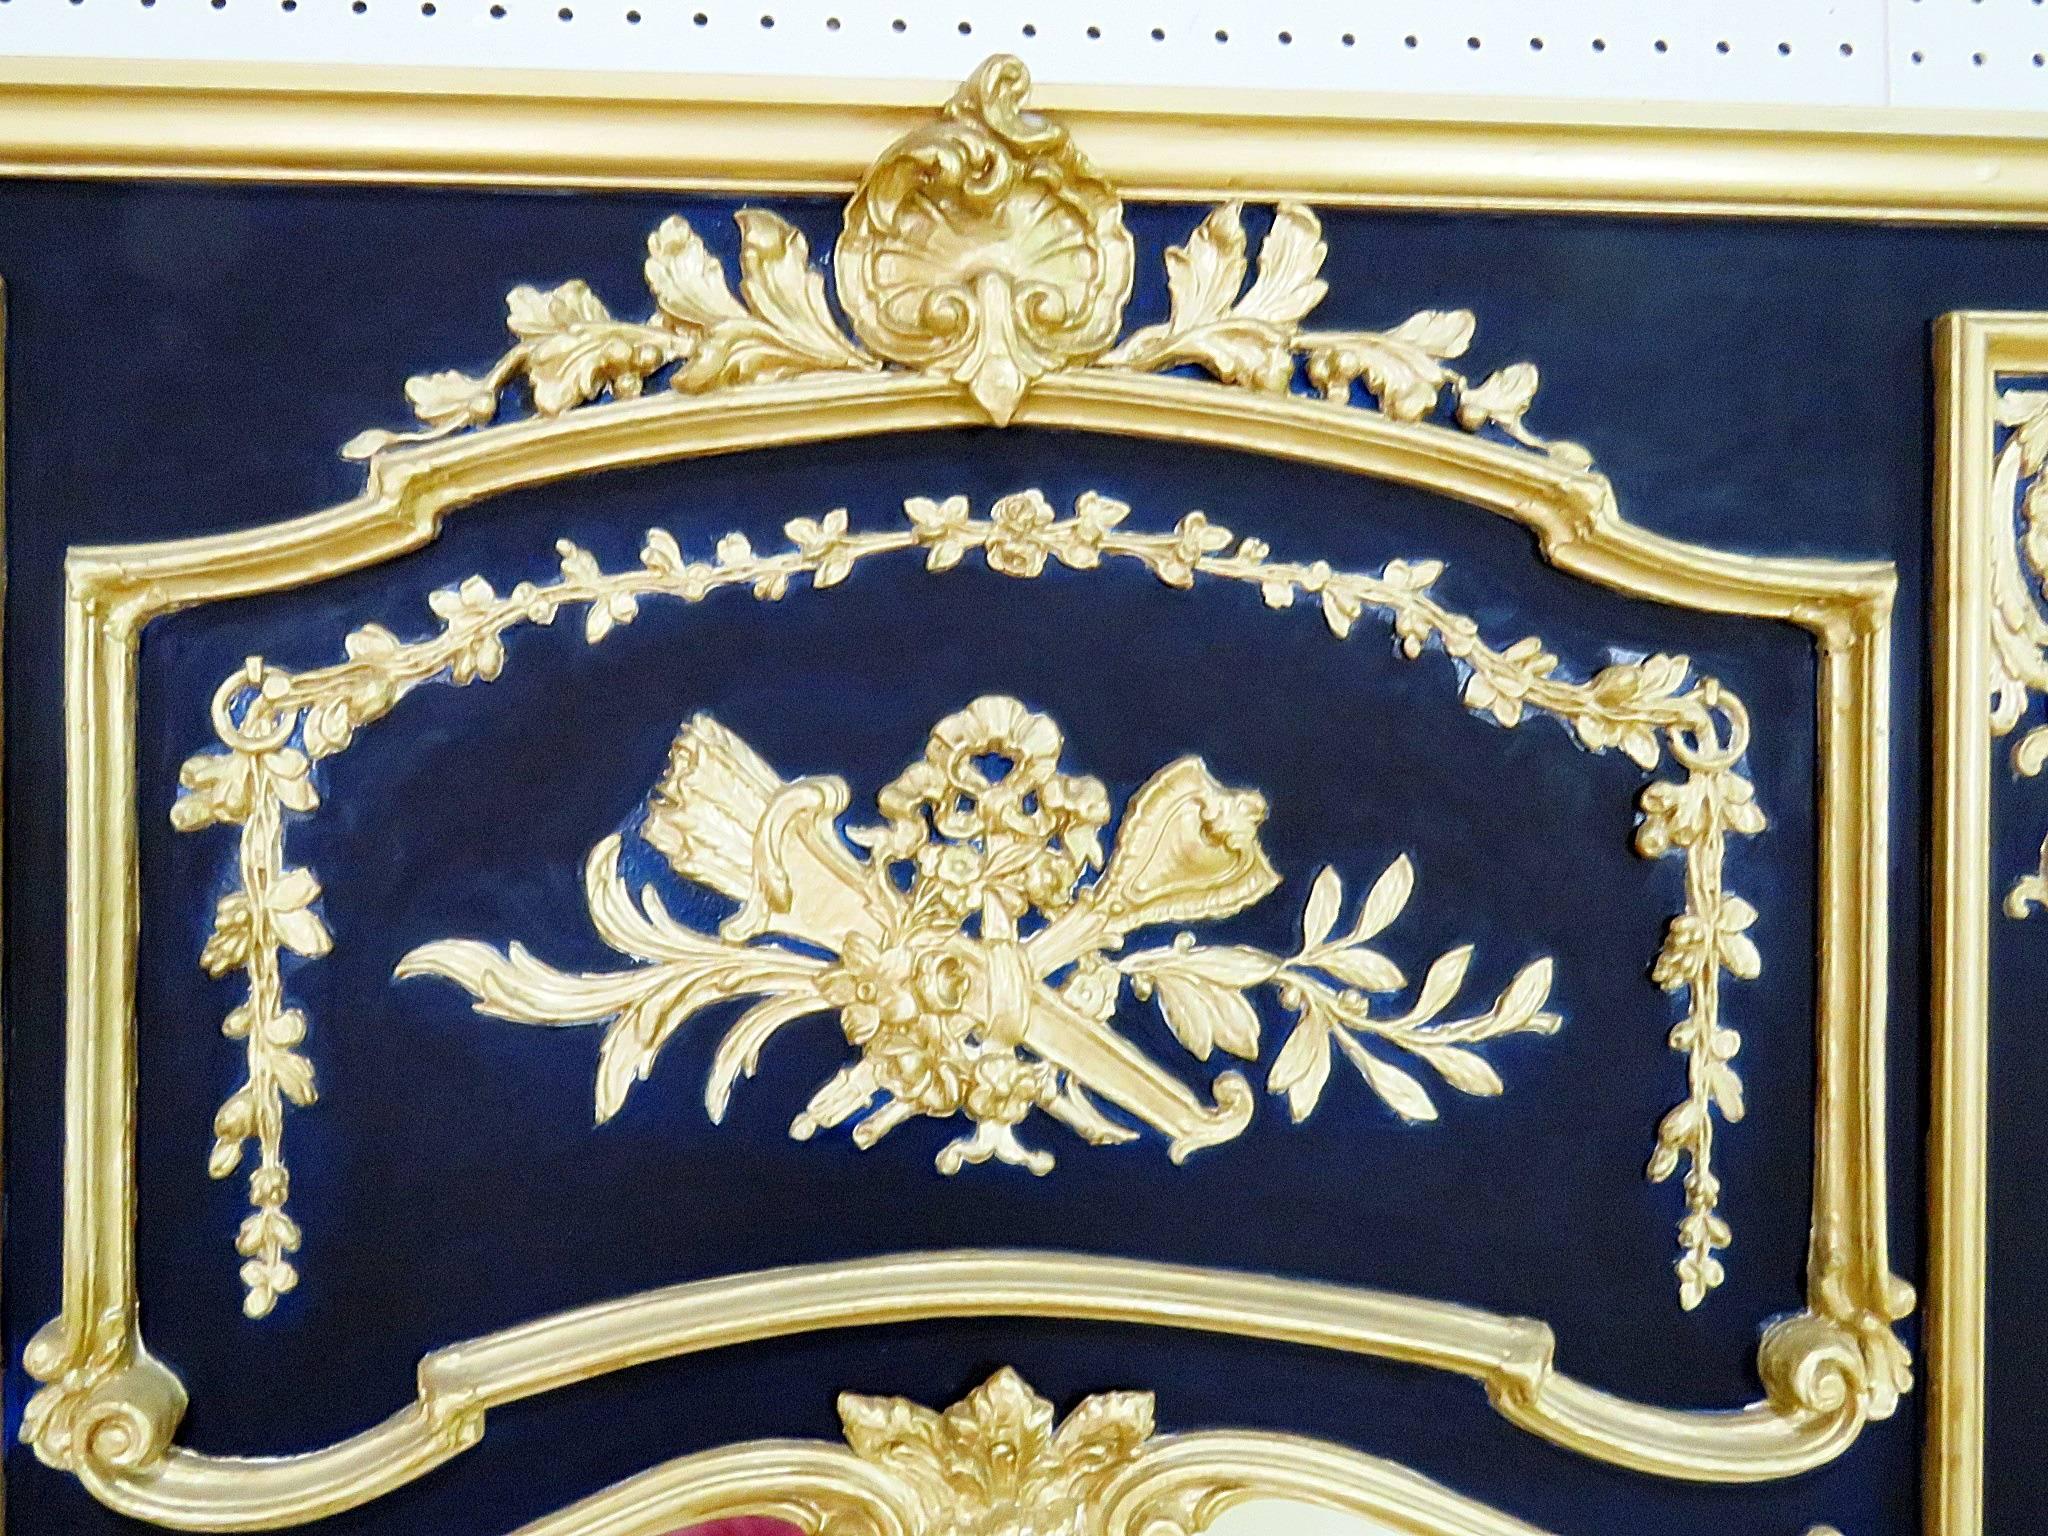 Friedman Brothers Neapolitan style wall mirror. Carved with blue paint and gilt trim. The mirror, itself, measures 33.75